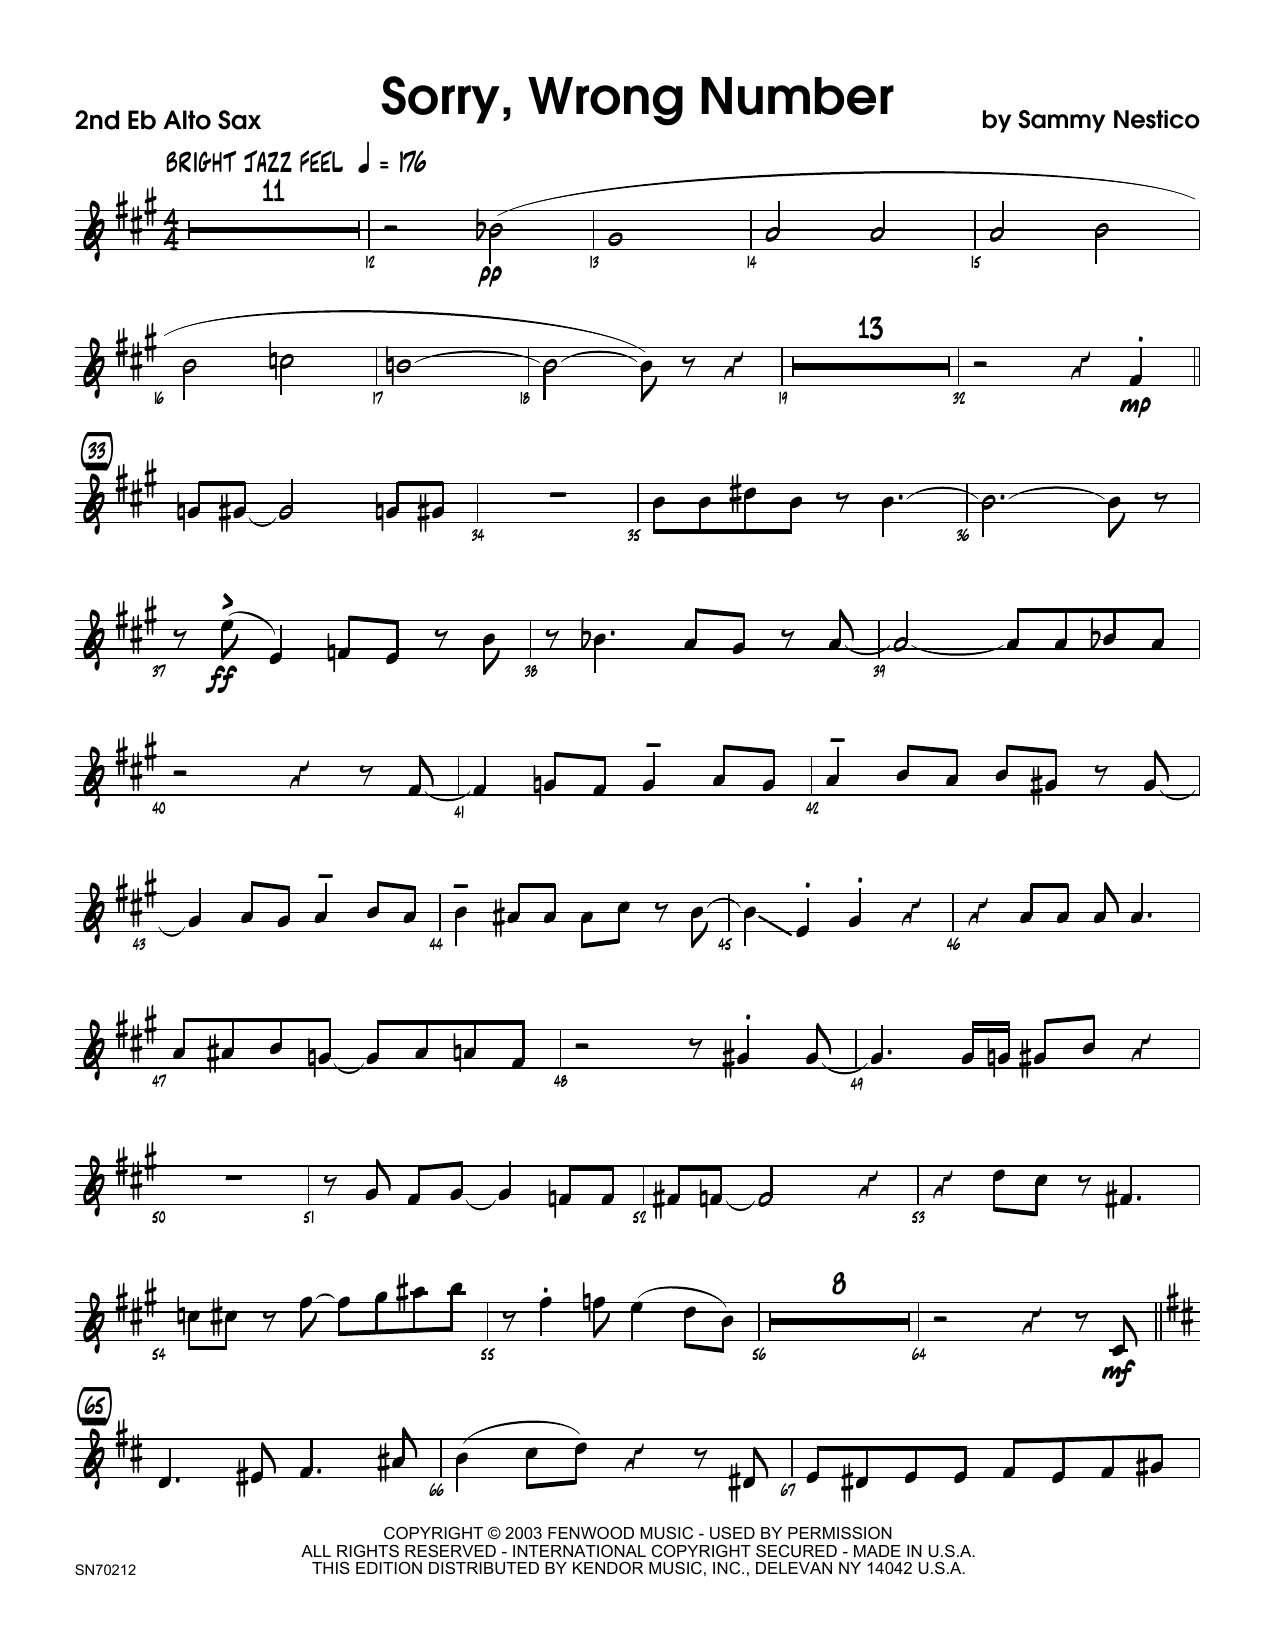 Download Sammy Nestico Sorry, Wrong Number - 2nd Eb Alto Saxop Sheet Music